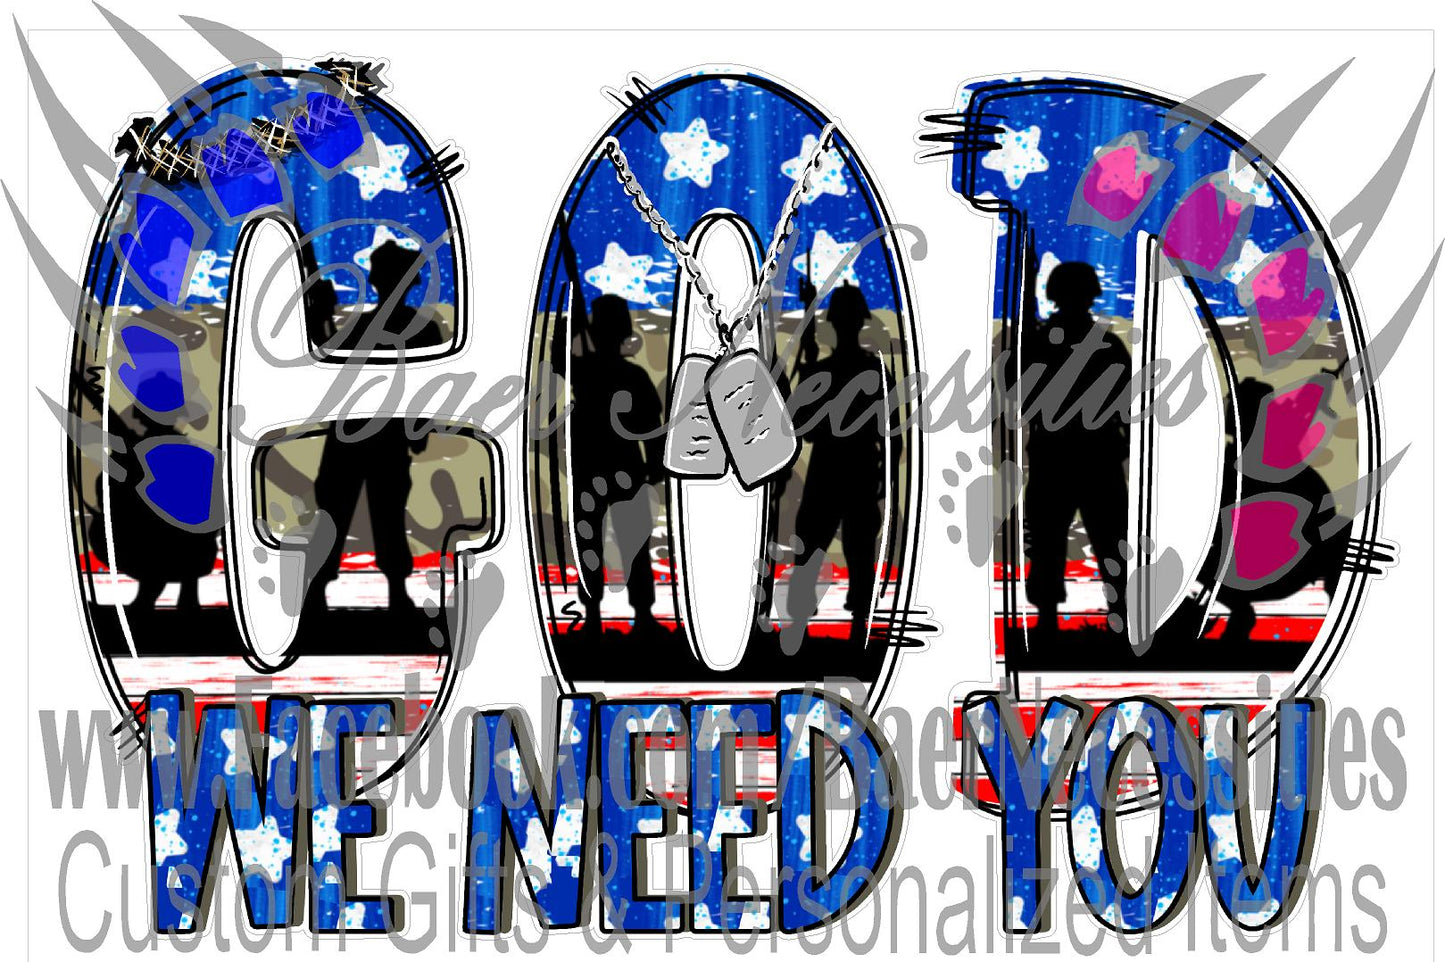 Go we need you now - Transfer